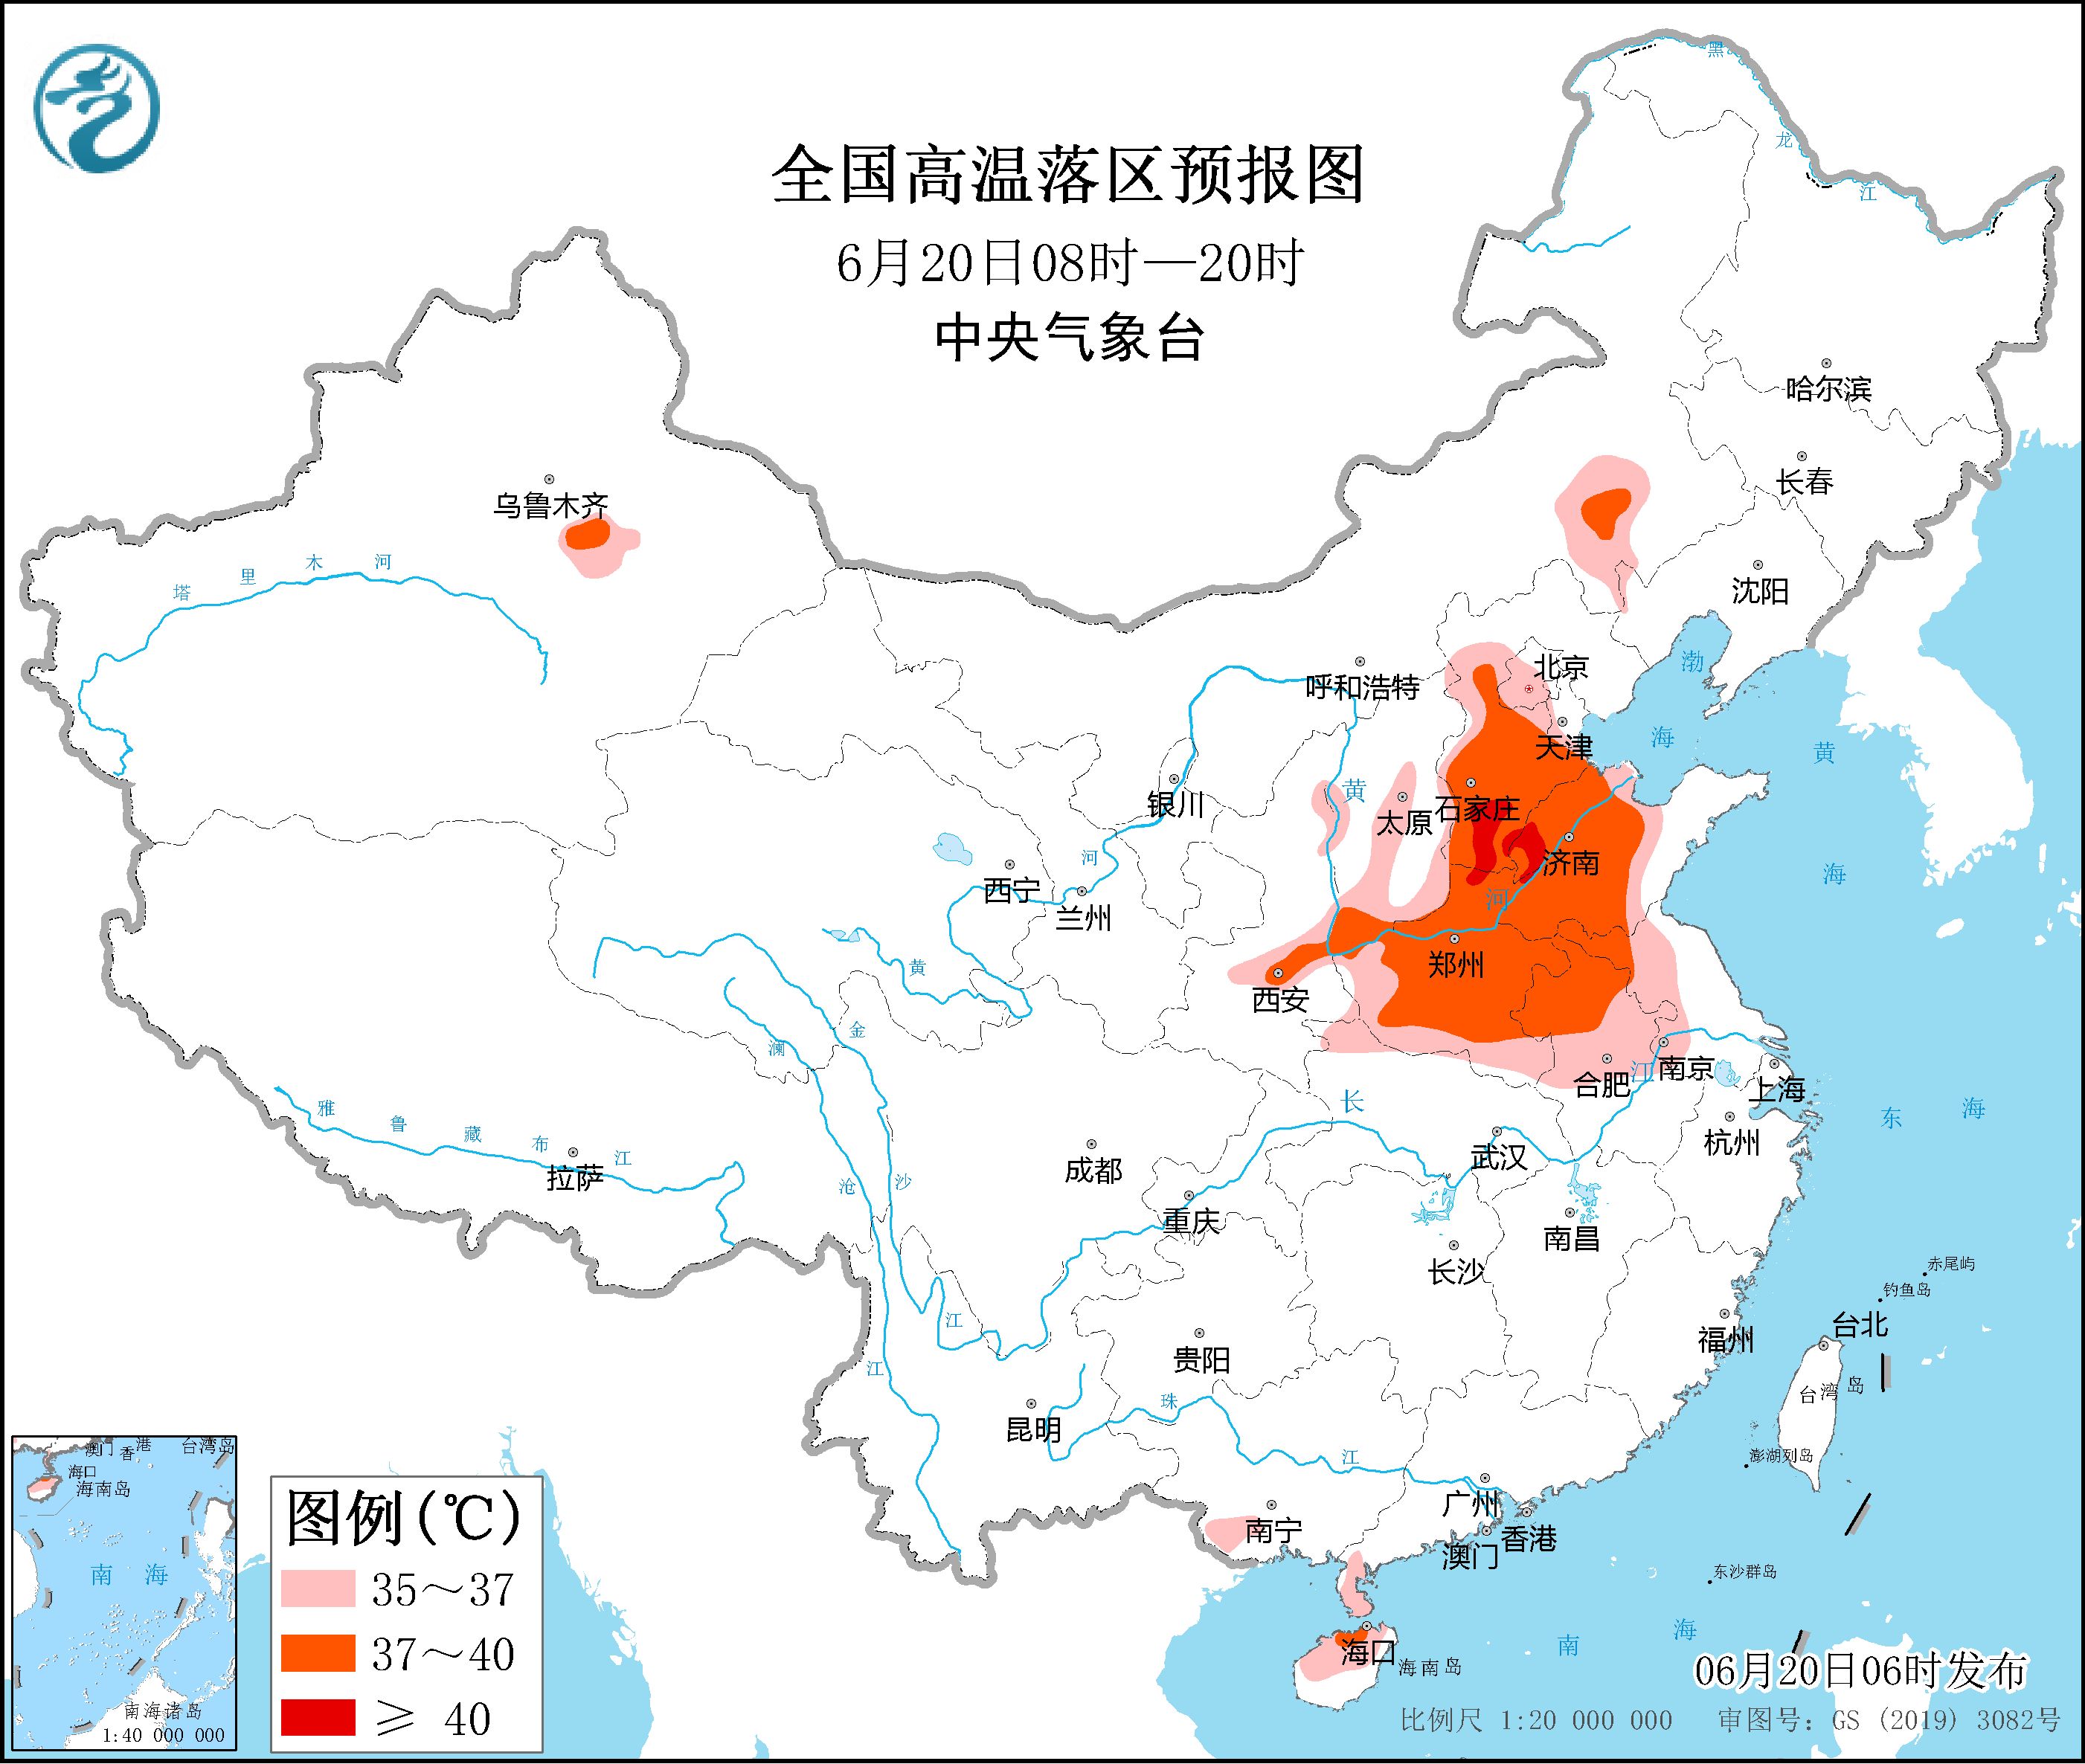 Heavy rainfall in Jiangnan, South China and other places, strong convection in Northeast Inner Mongolia, strong convection in North China, Huanghuai and other places, high temperature weather continues